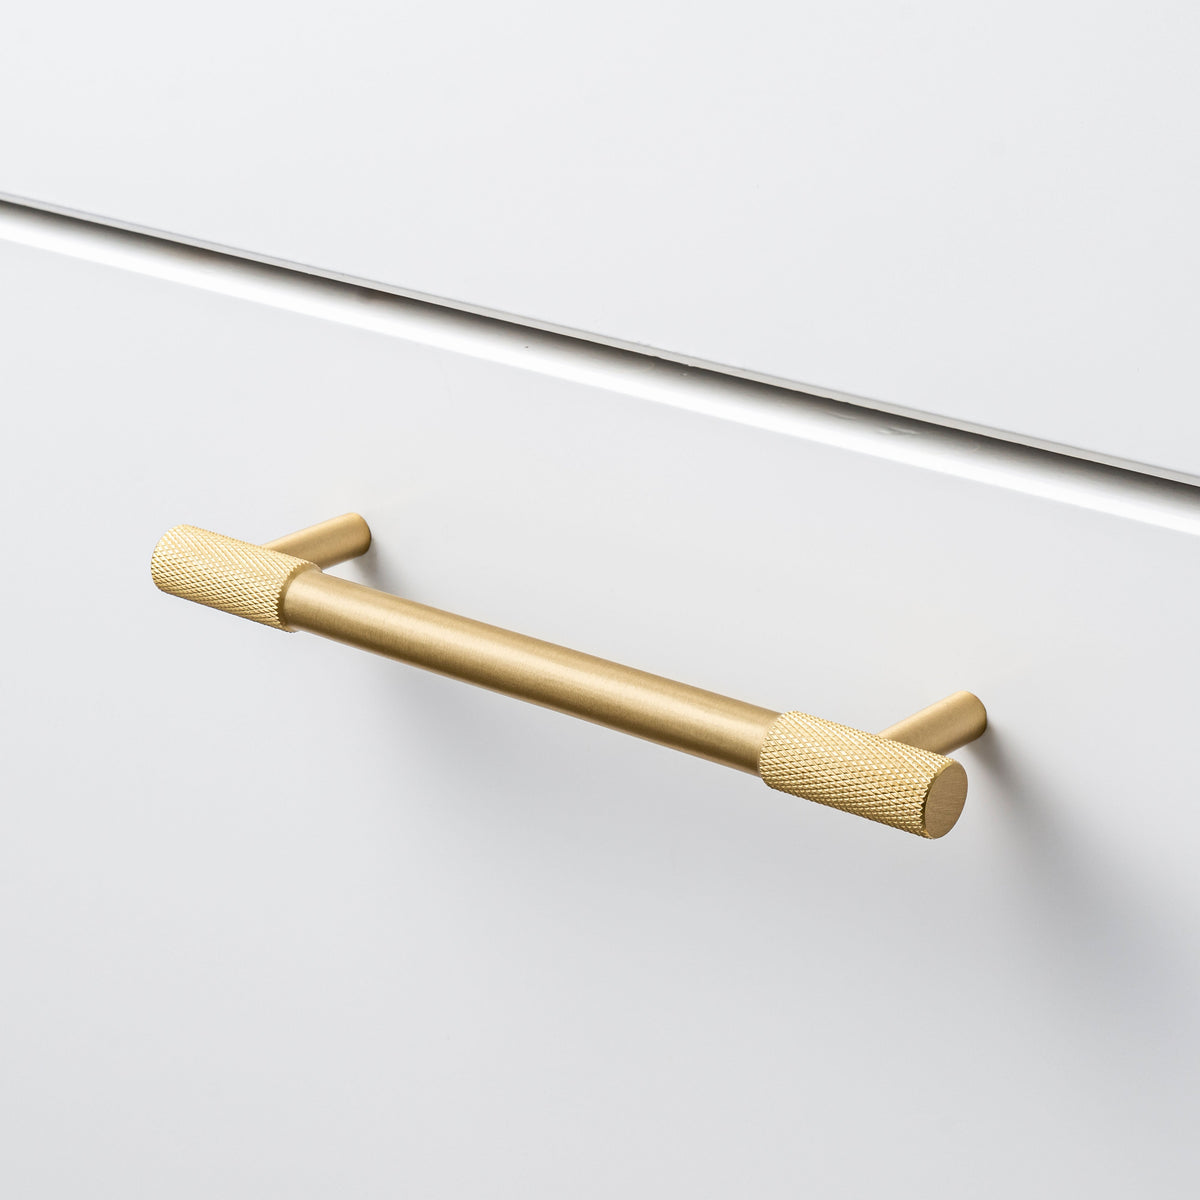 Gold Threaded Cabinet Handles